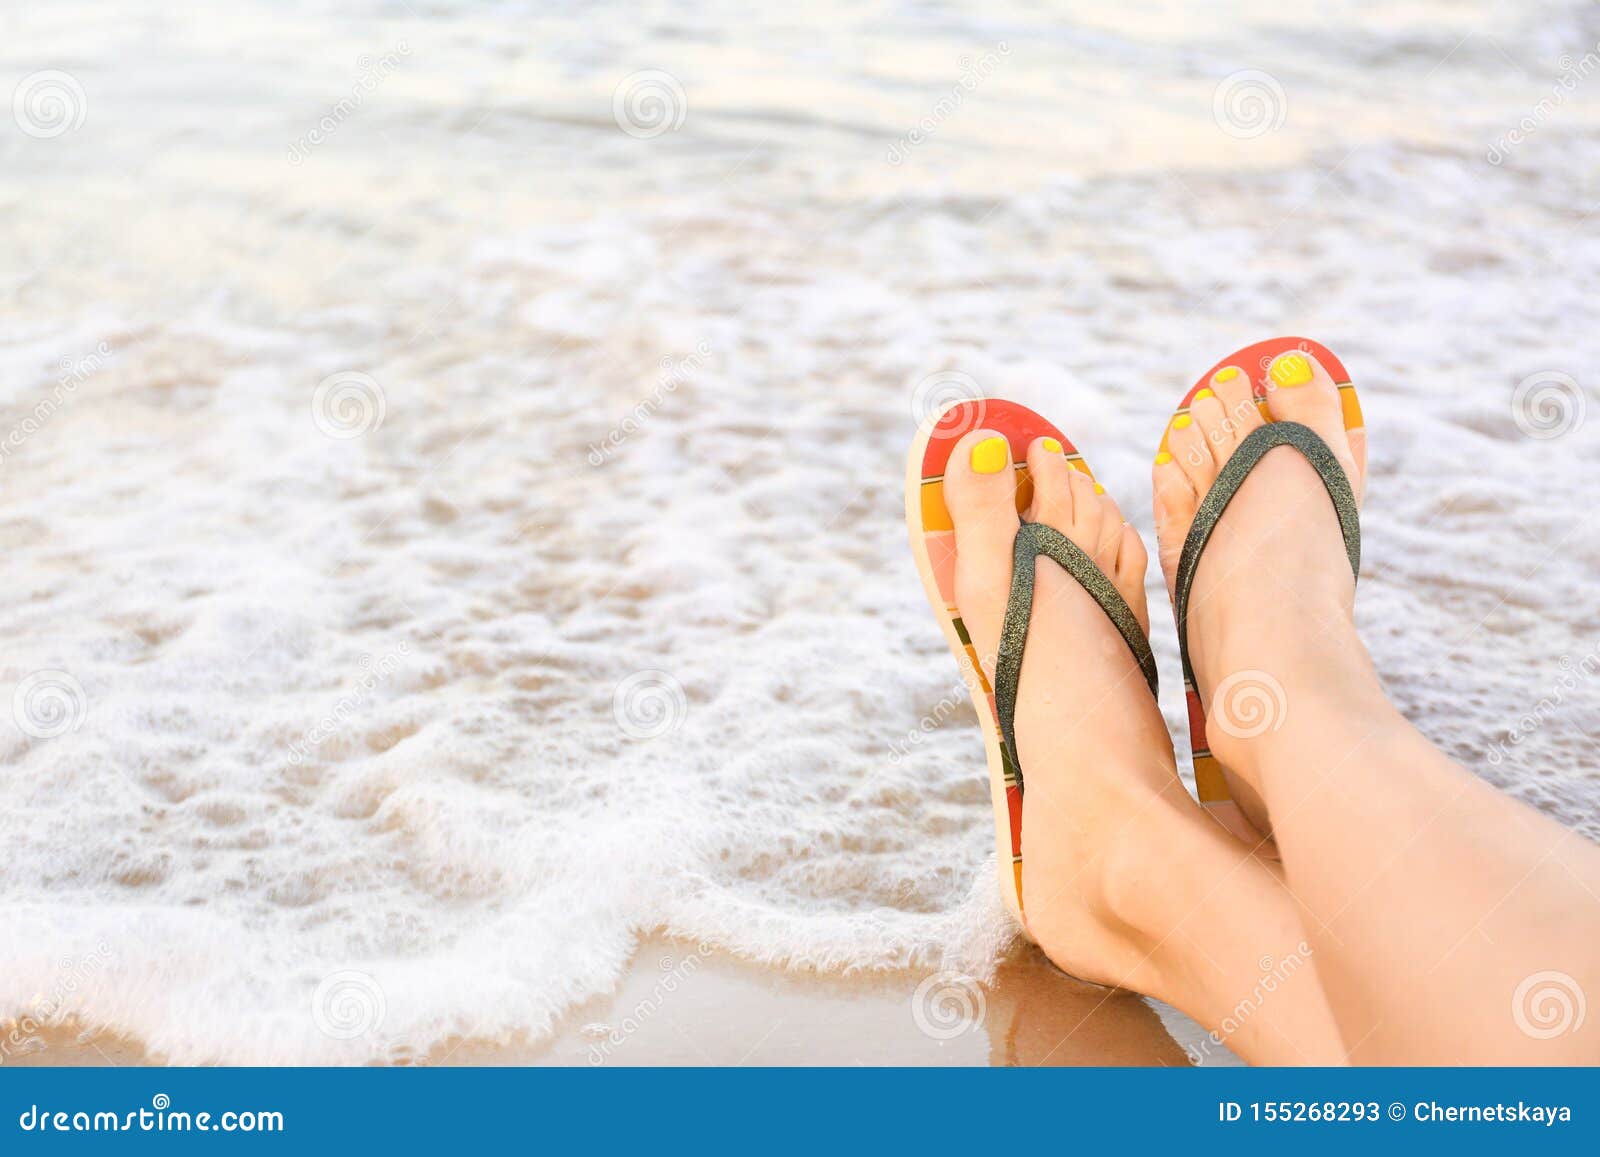 Closeup of Woman with Stylish Flip Flops on Sand Near Sea, Space for ...